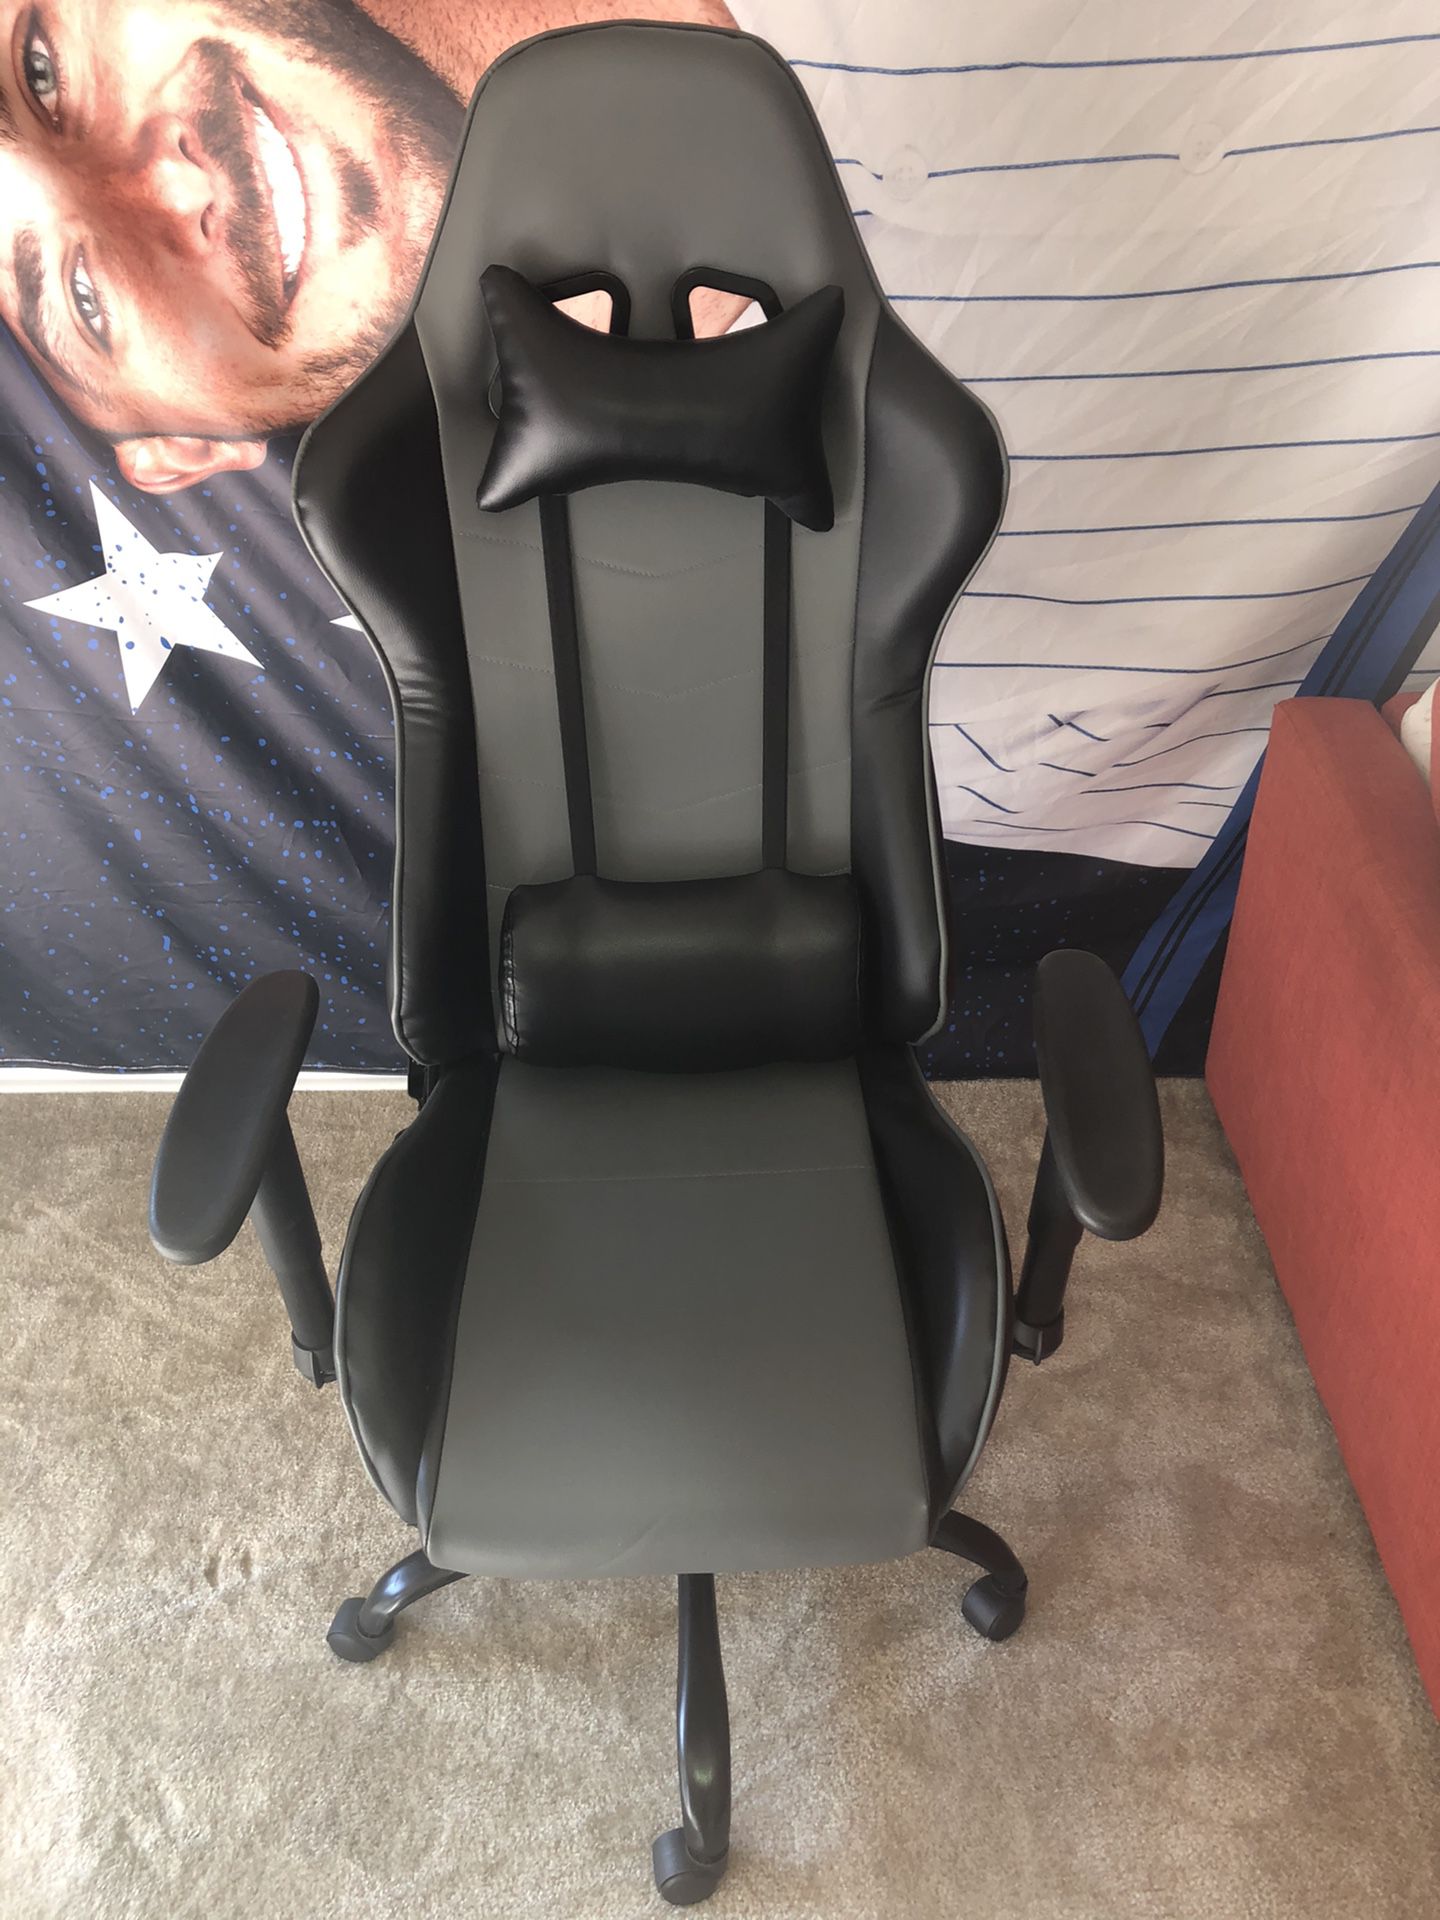 Computer/Gaming chair